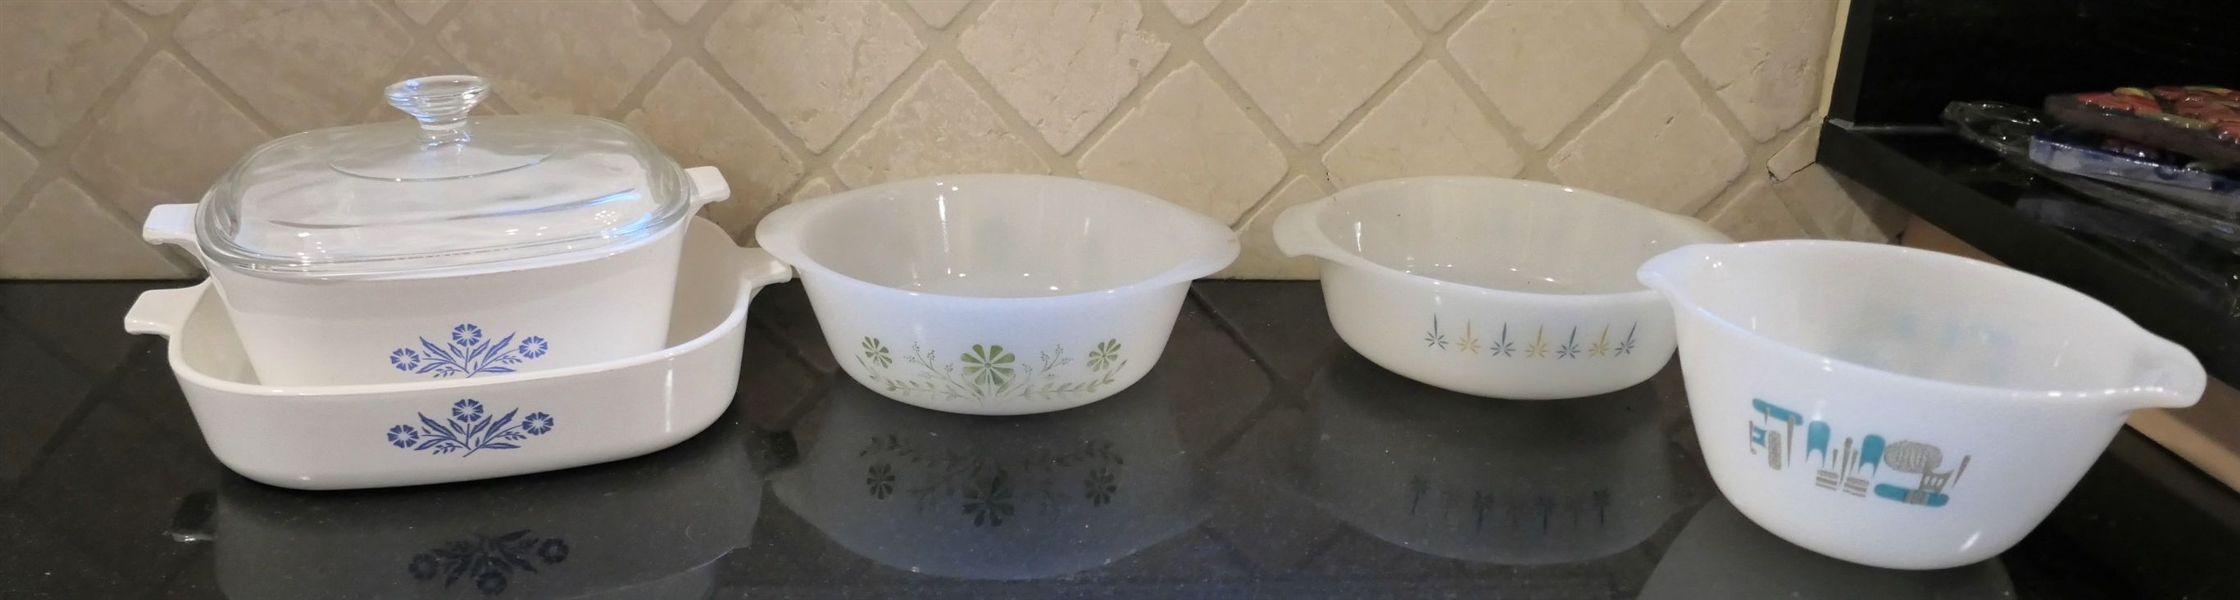 5 Pieces of Bakeware including Corning, Fireking, and Glassbake 